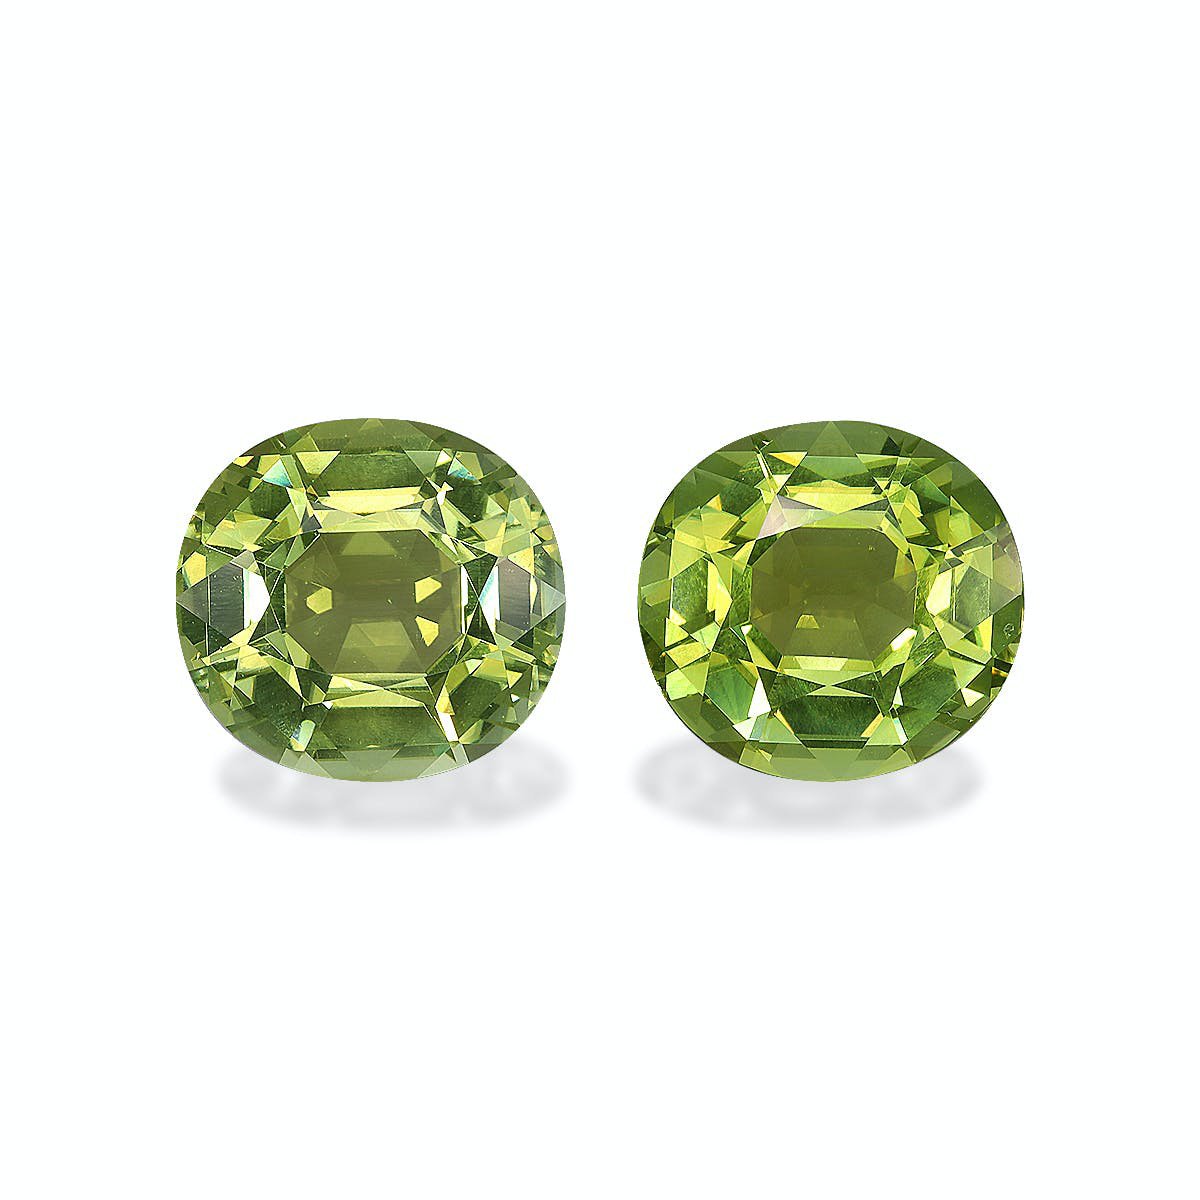 Picture of Lime Green Cuprian Tourmaline 22.97ct - Pair (MZ0250)